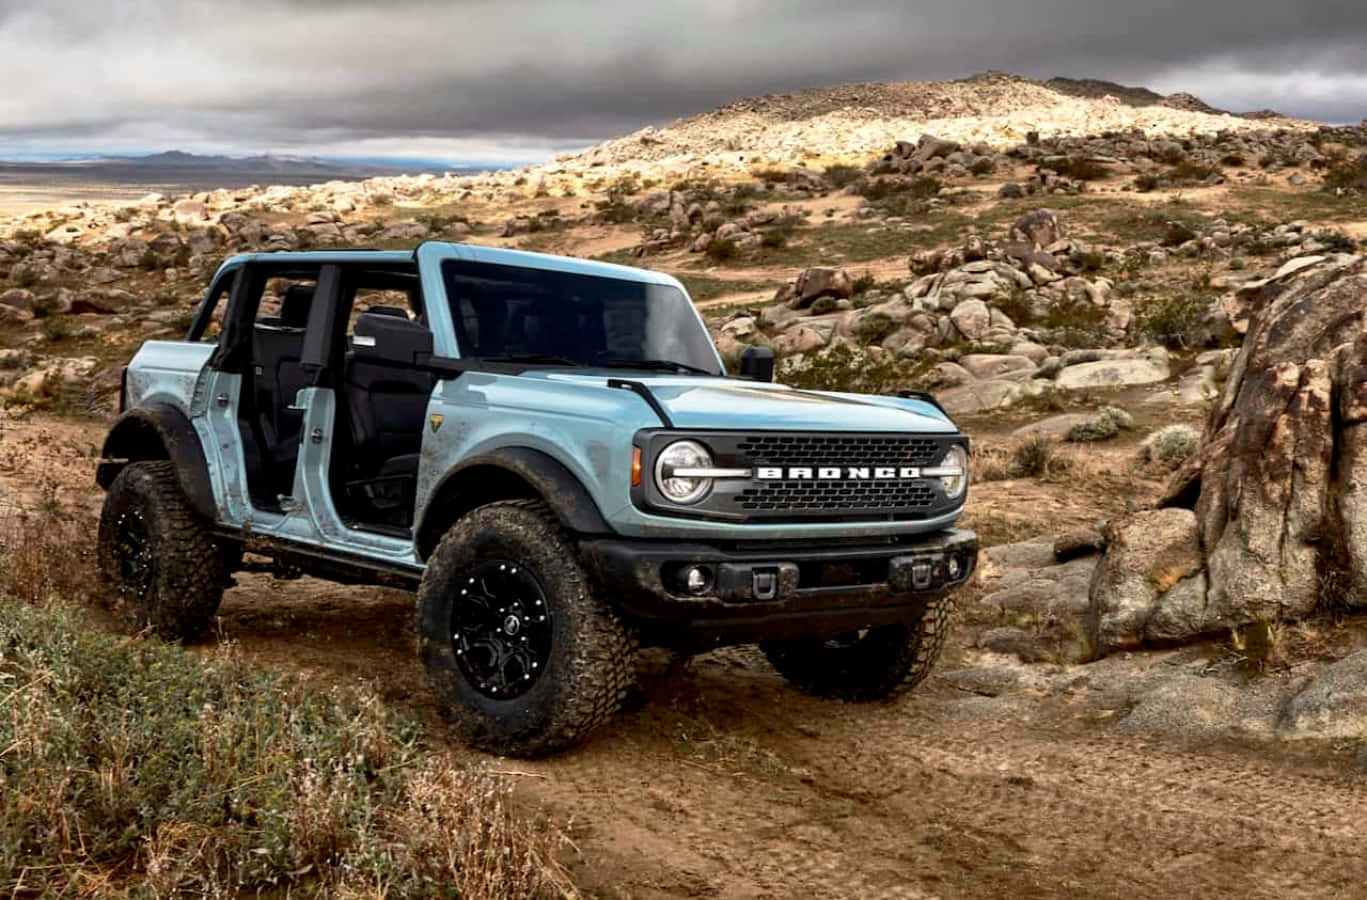 The Legendary Ford Bronco is Back!